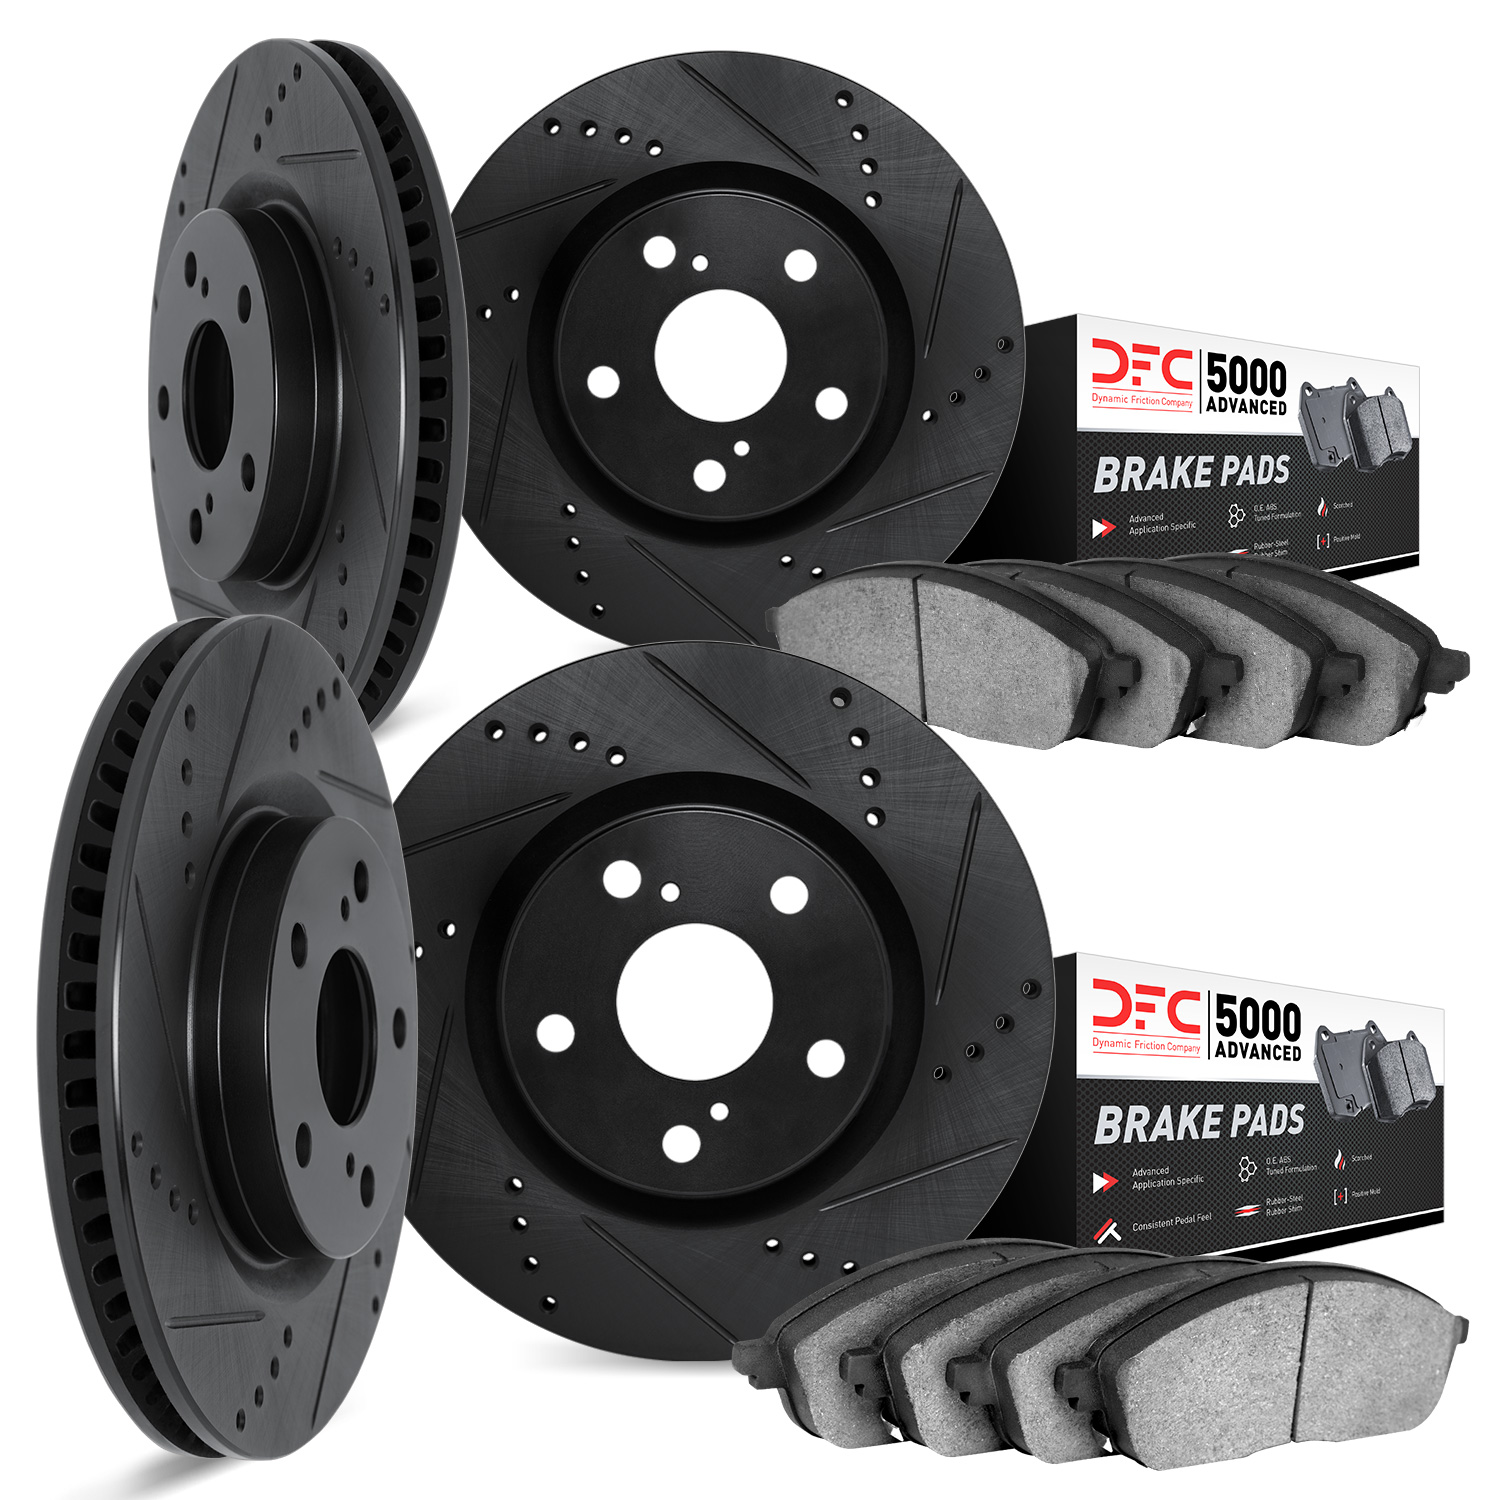 8504-75008 Drilled/Slotted Brake Rotors w/5000 Advanced Brake Pads Kit [Black], Fits Select Lexus/Toyota/Scion, Position: Front